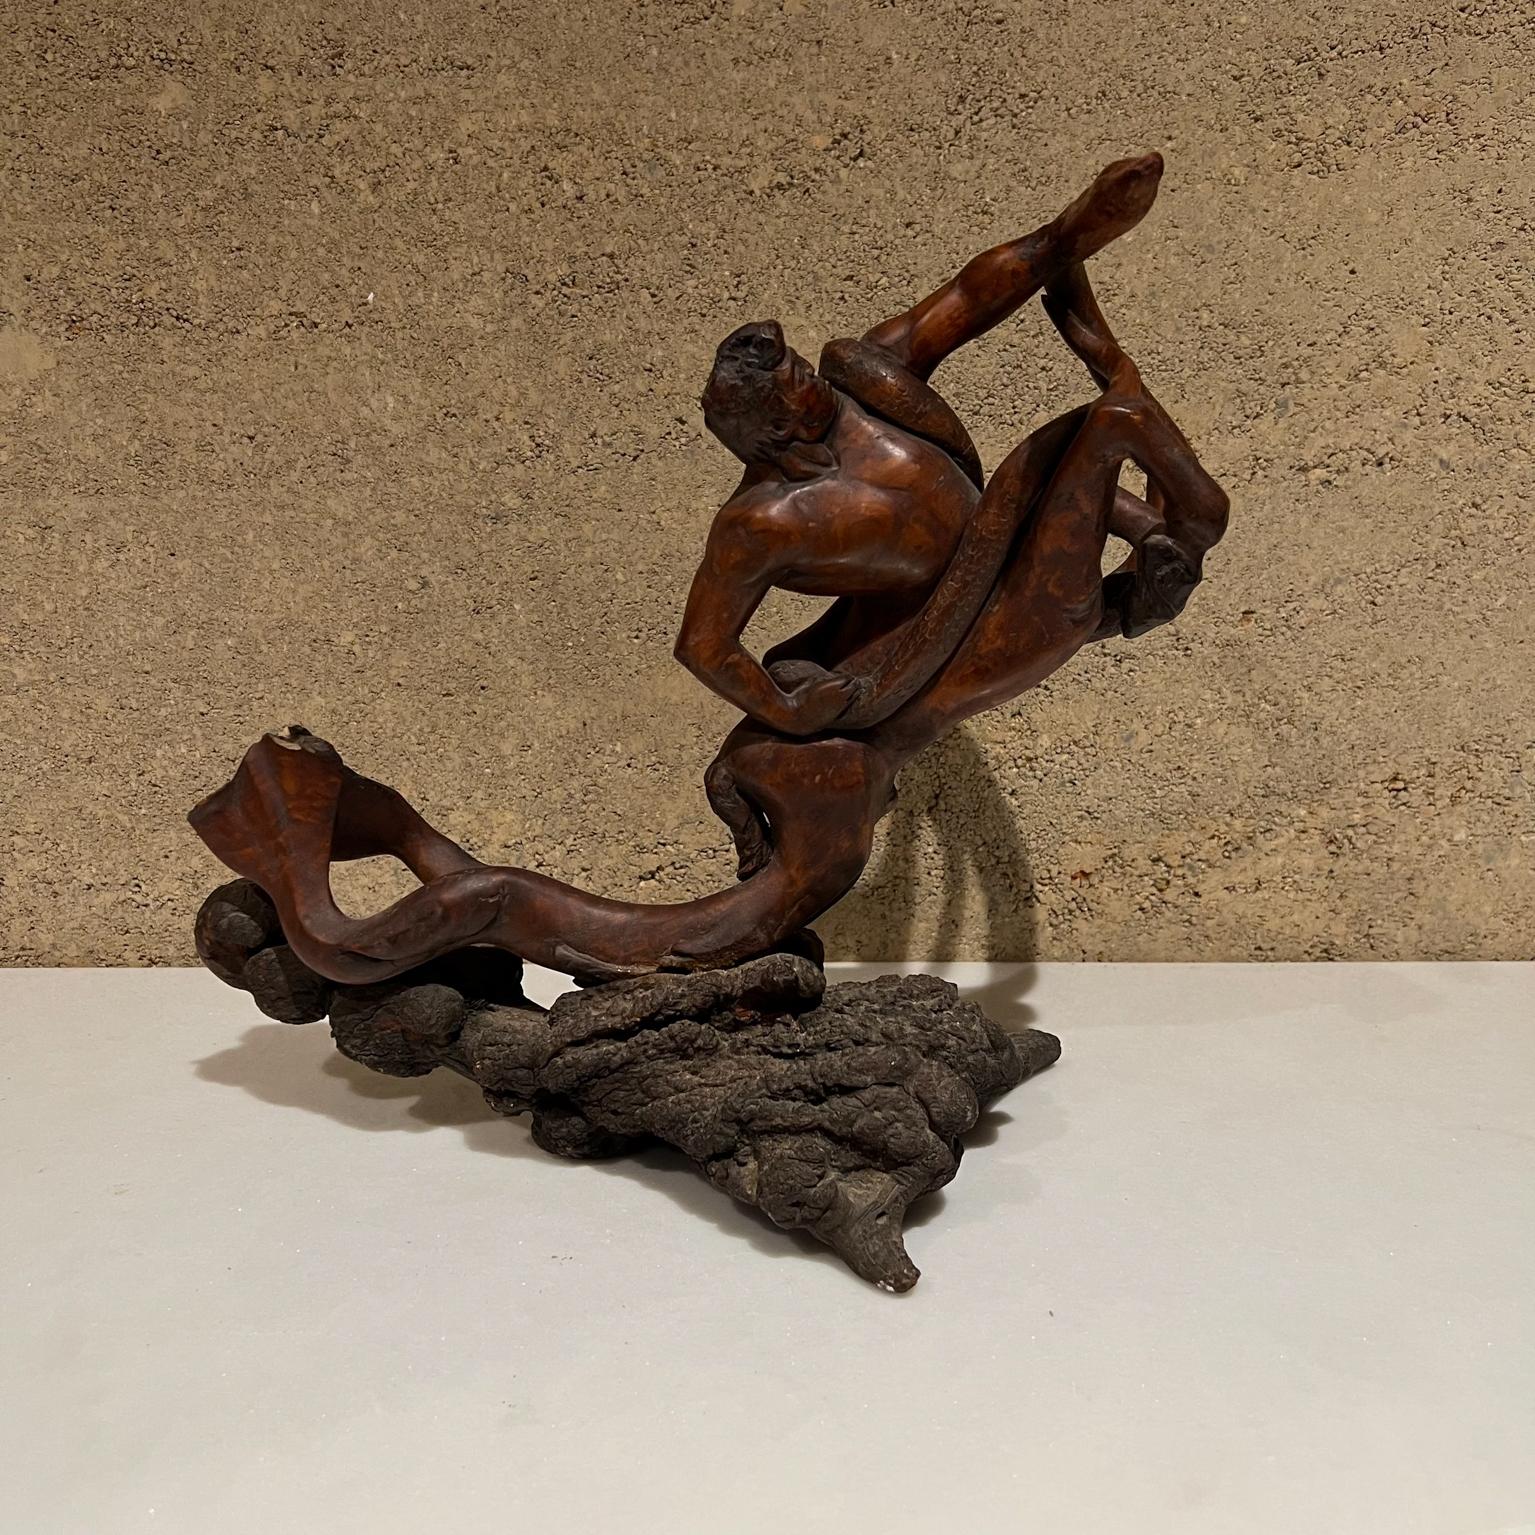 Mythical Hercules and The Hydra Wood Sculpture
11 tall x 6 w x 12 d
Original preowned vintage condition.
See images provided.